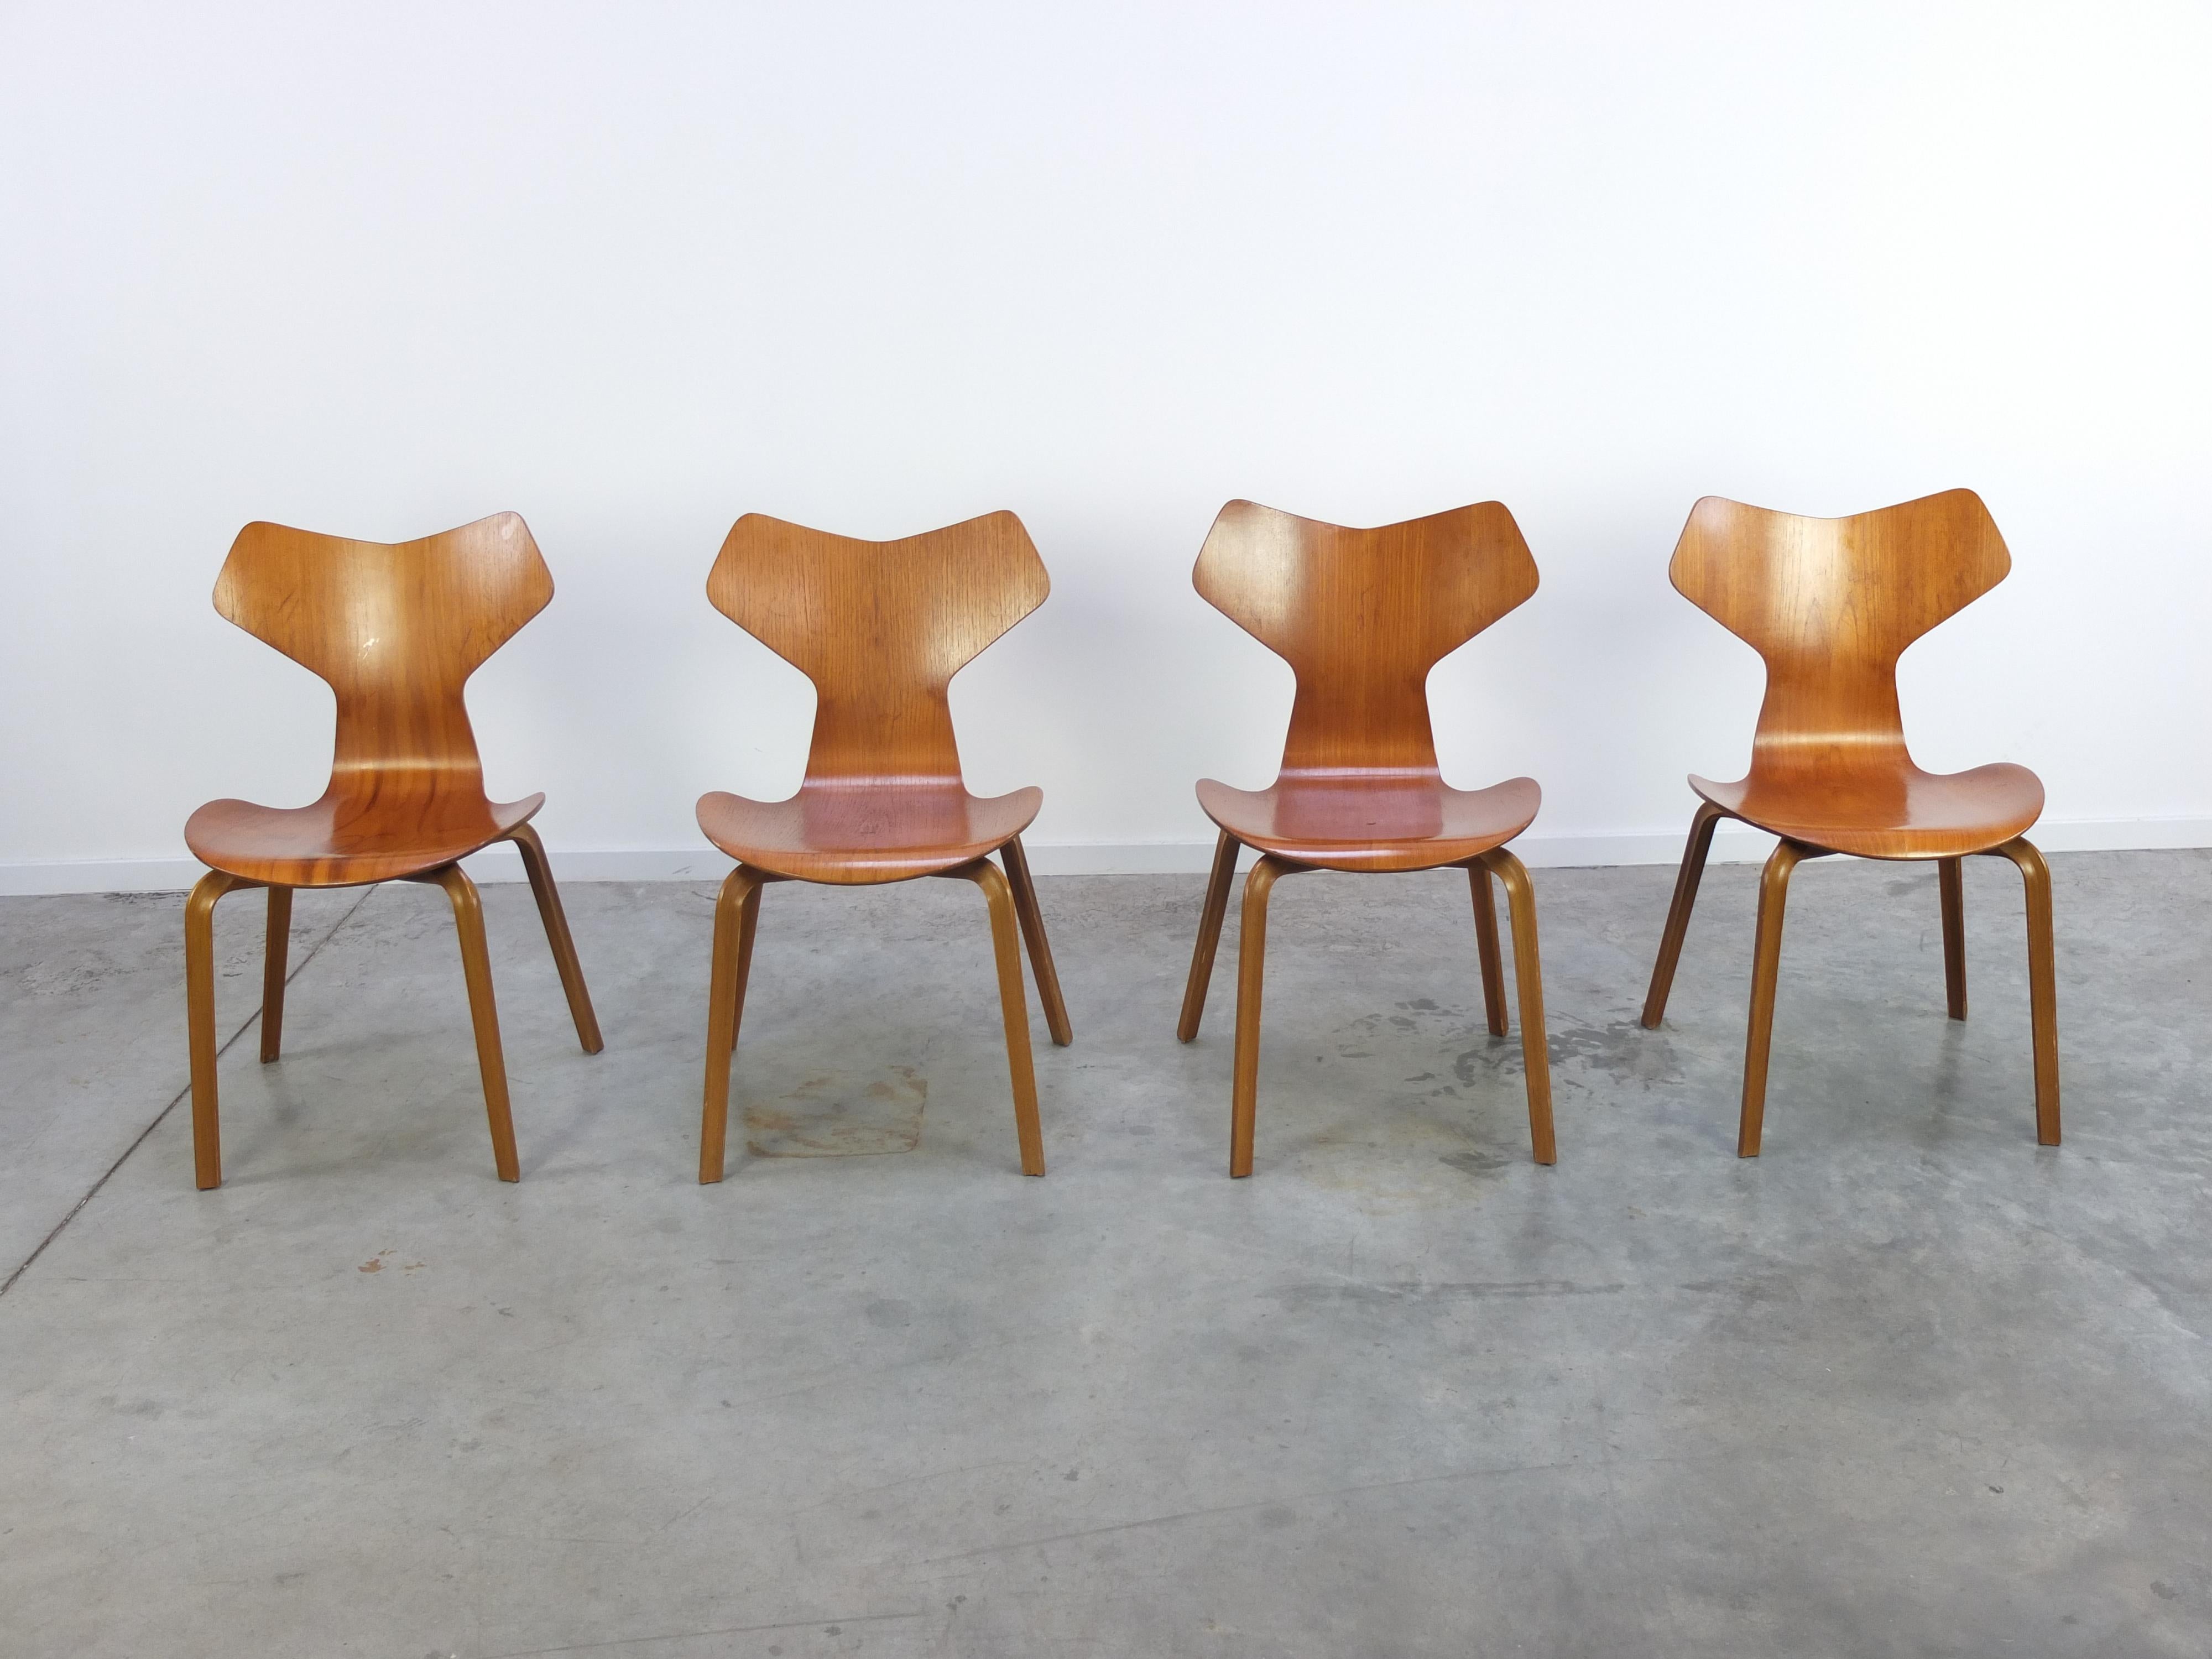 Original set of 4 ‘Grand Prix’ chairs designed by Arne Jacobsen for Fritz Hansen in 1957. Later that year, the chair was displayed at the Triennale in Milan where it received the Grand Prix, the finest distinction of the exhibition. These chairs are